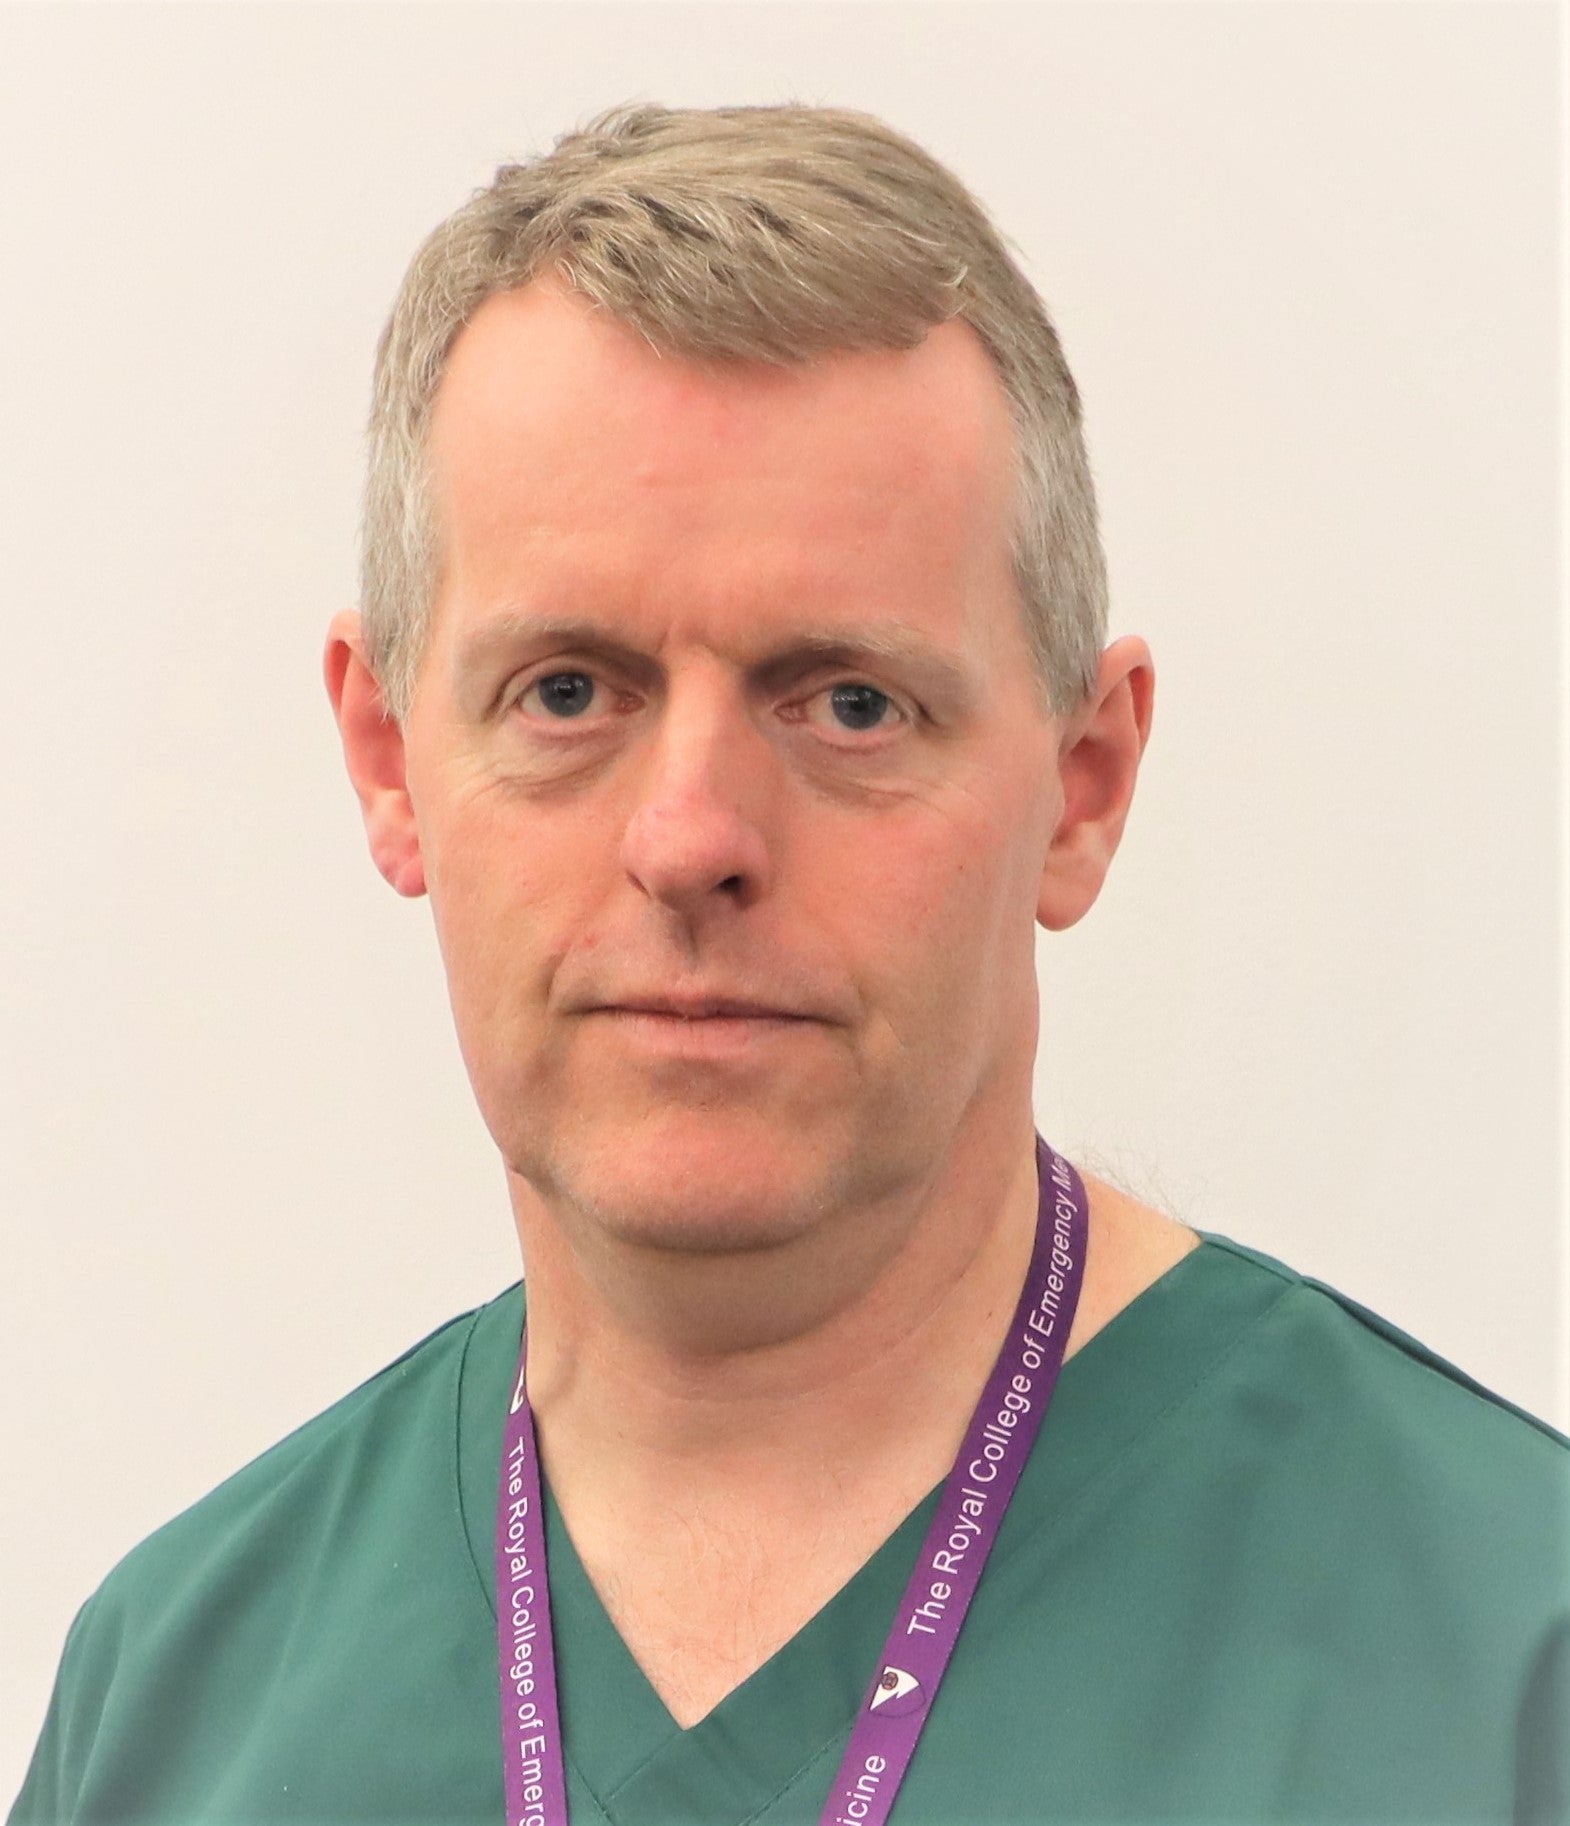 Adrian Boyle, the president of the Royal College of Emergency Medicine, says that the pressure staff are under means that some conditions can be missed